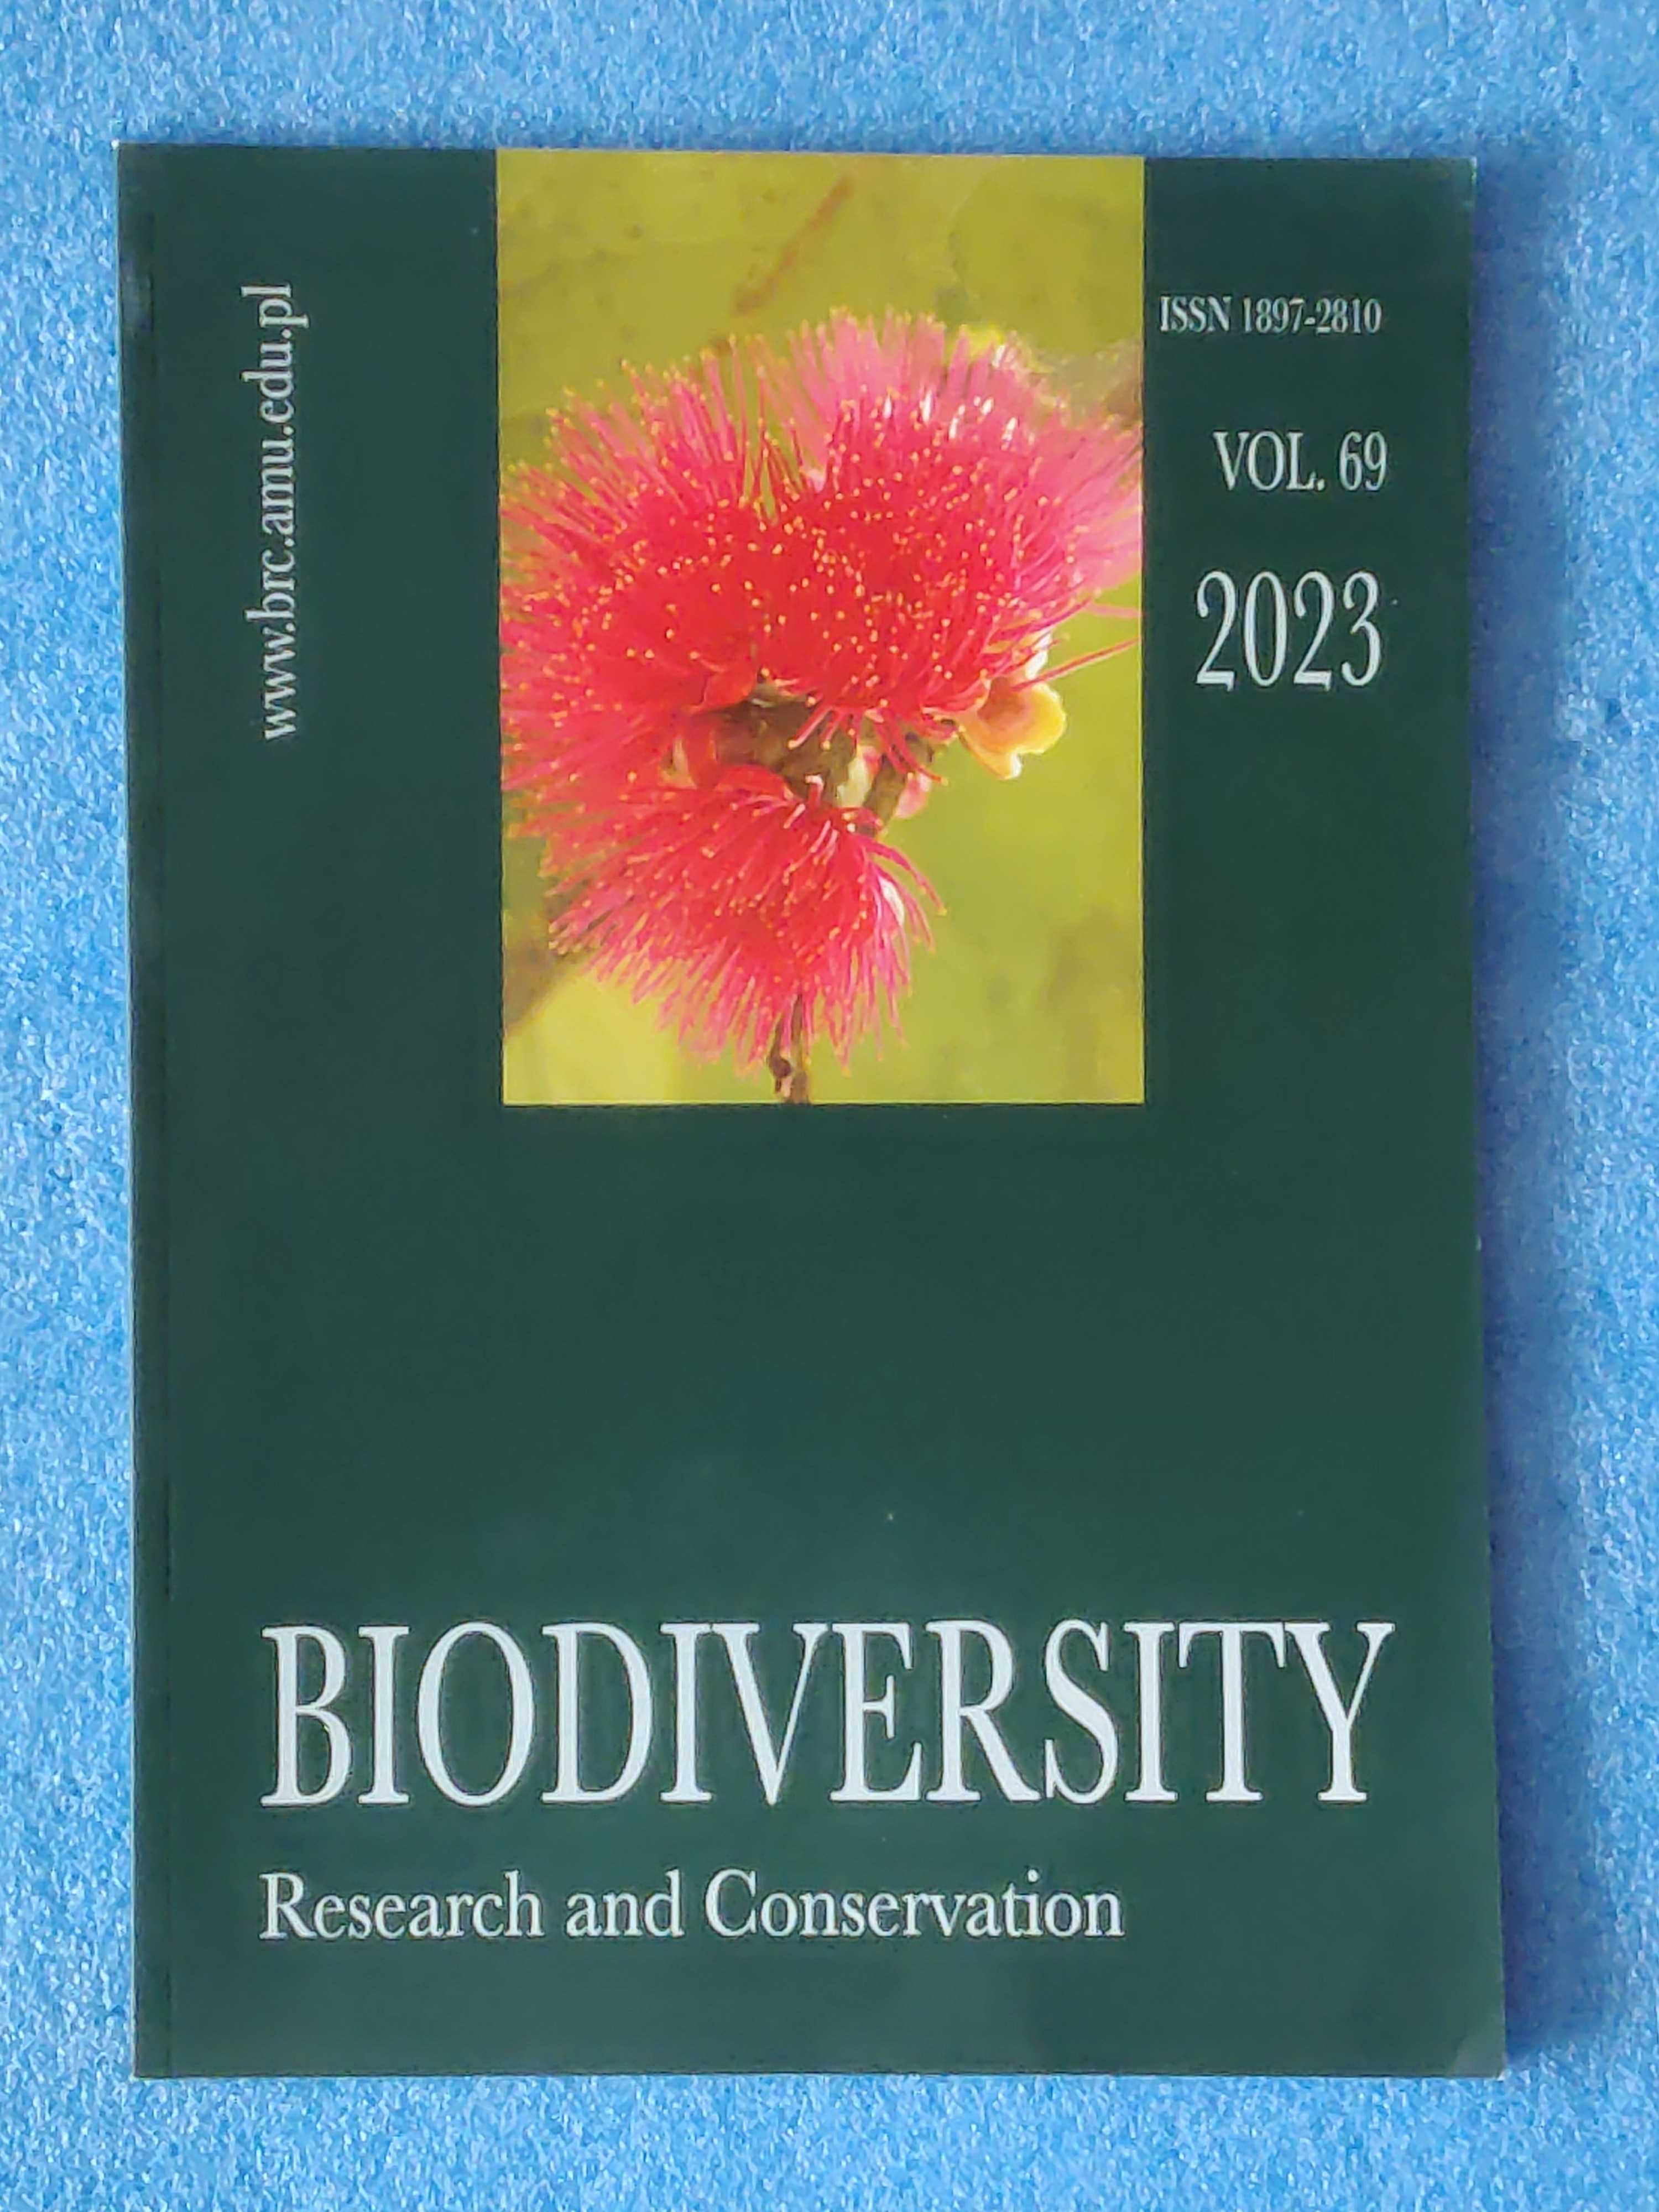 Biodiversity Research and Conservation 2021, 2022, 2023